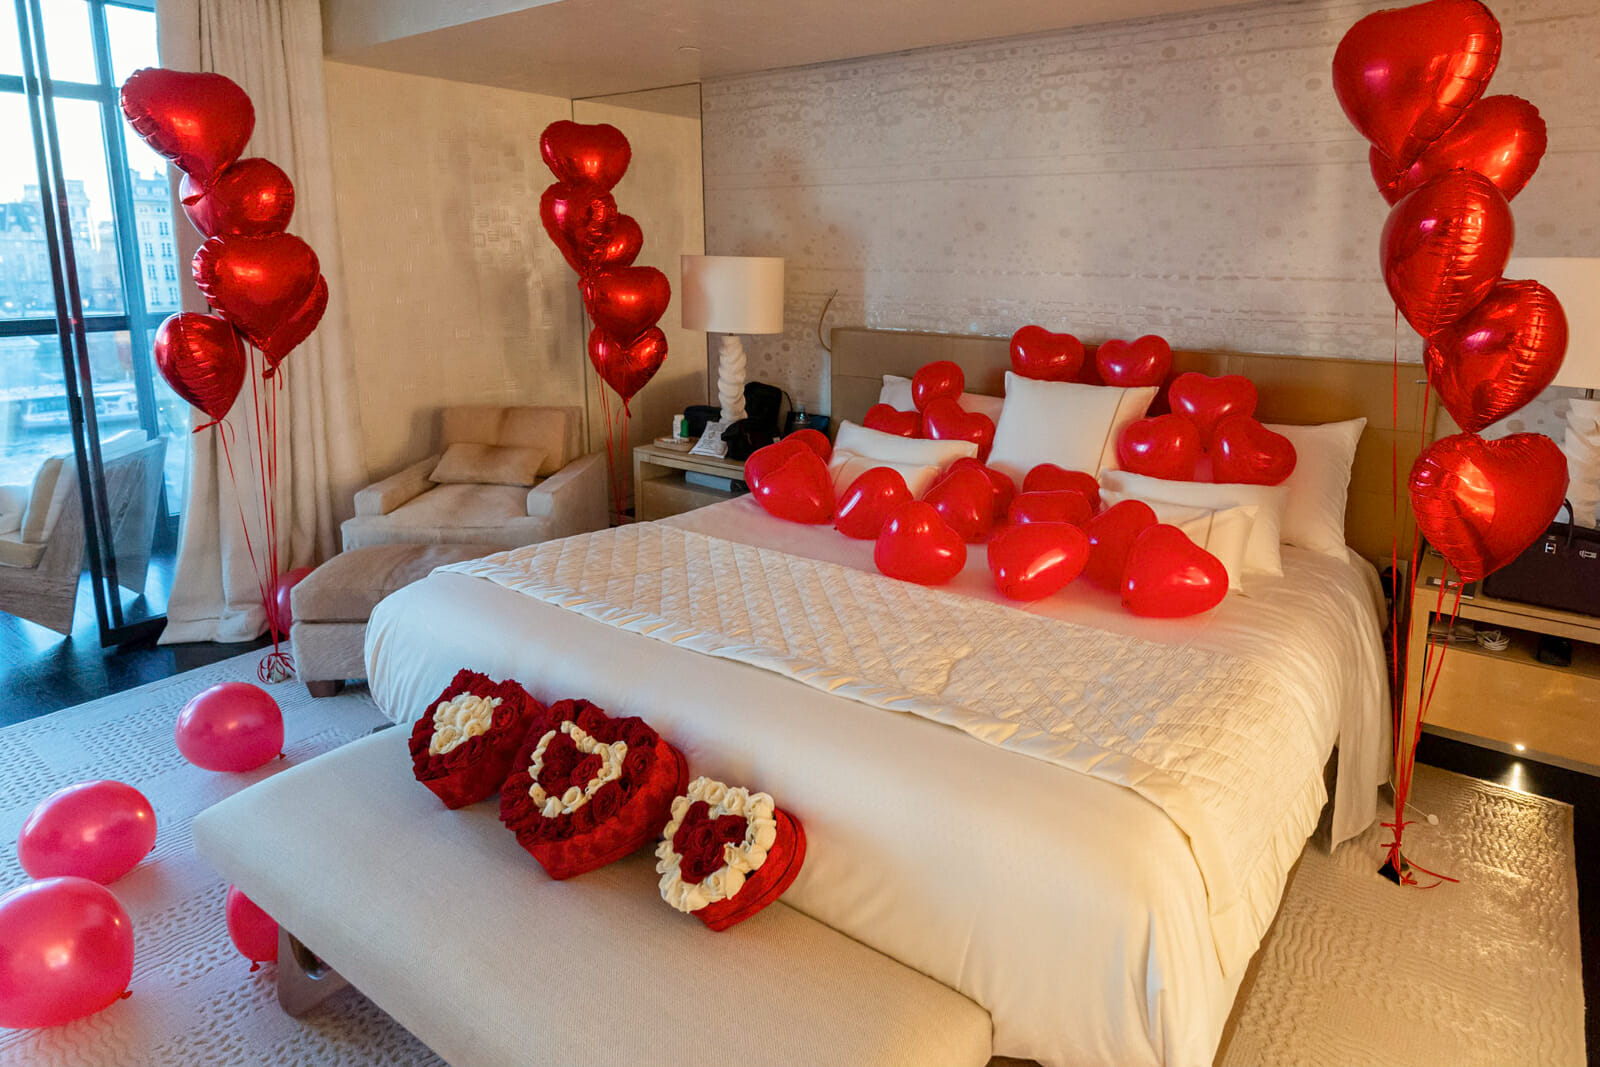 Surprise hotel suite decoration with red hearts made out of rose petals and balloons